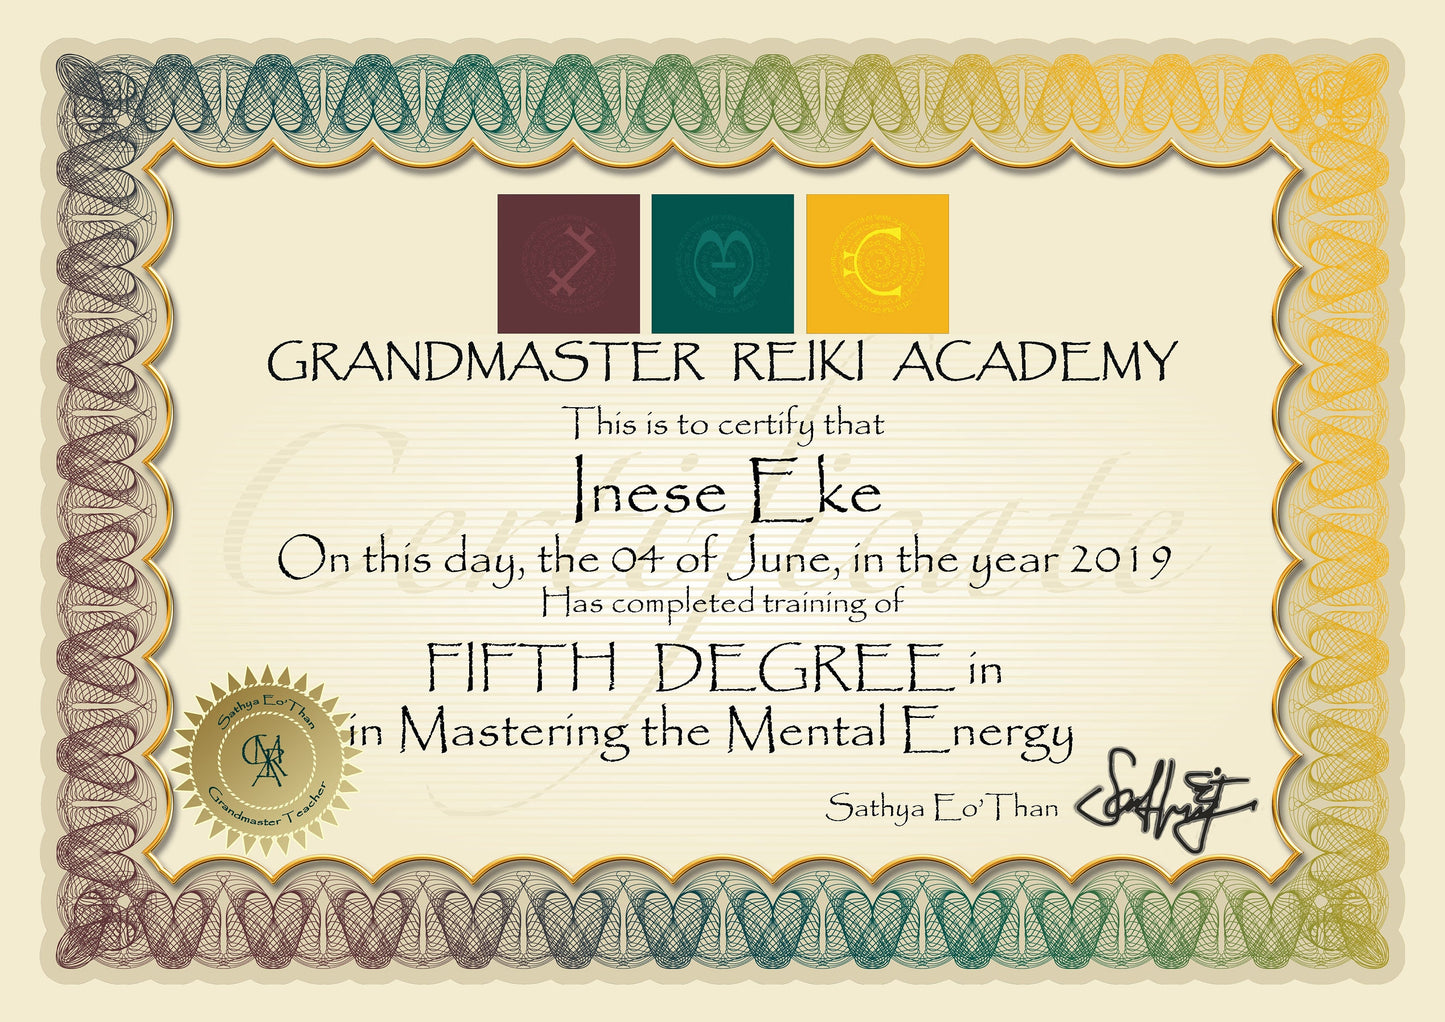 Professional Distance Reiki Healing Session from Reiki Grand Master